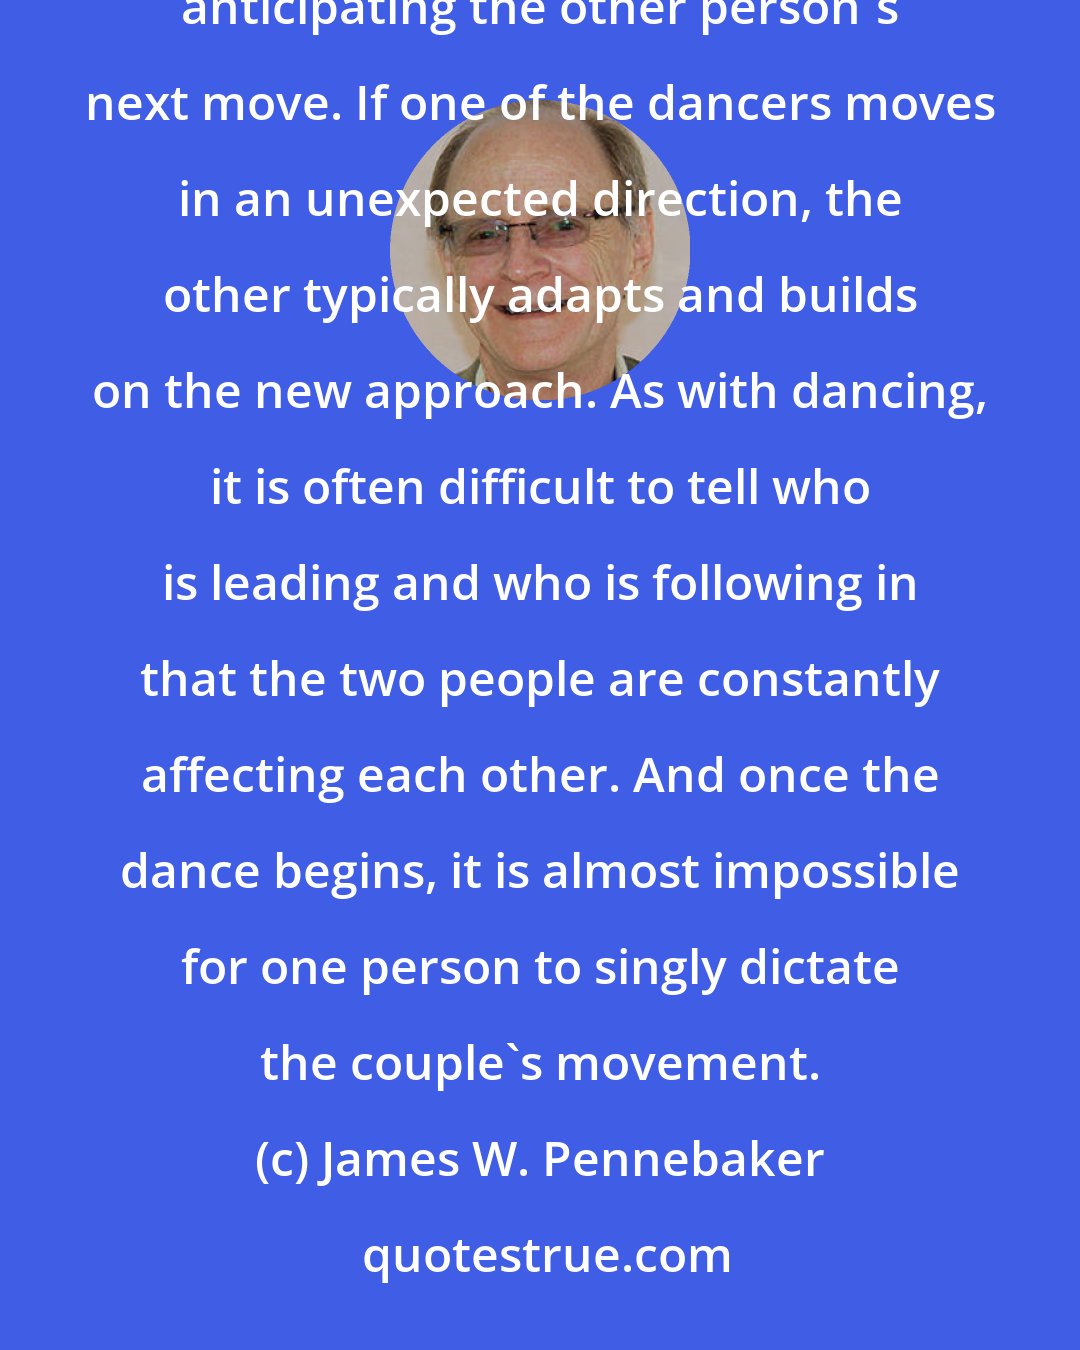 James W. Pennebaker: Conversations are like dances. Two people effortlessly move in step with one another, usually anticipating the other person's next move. If one of the dancers moves in an unexpected direction, the other typically adapts and builds on the new approach. As with dancing, it is often difficult to tell who is leading and who is following in that the two people are constantly affecting each other. And once the dance begins, it is almost impossible for one person to singly dictate the couple's movement.